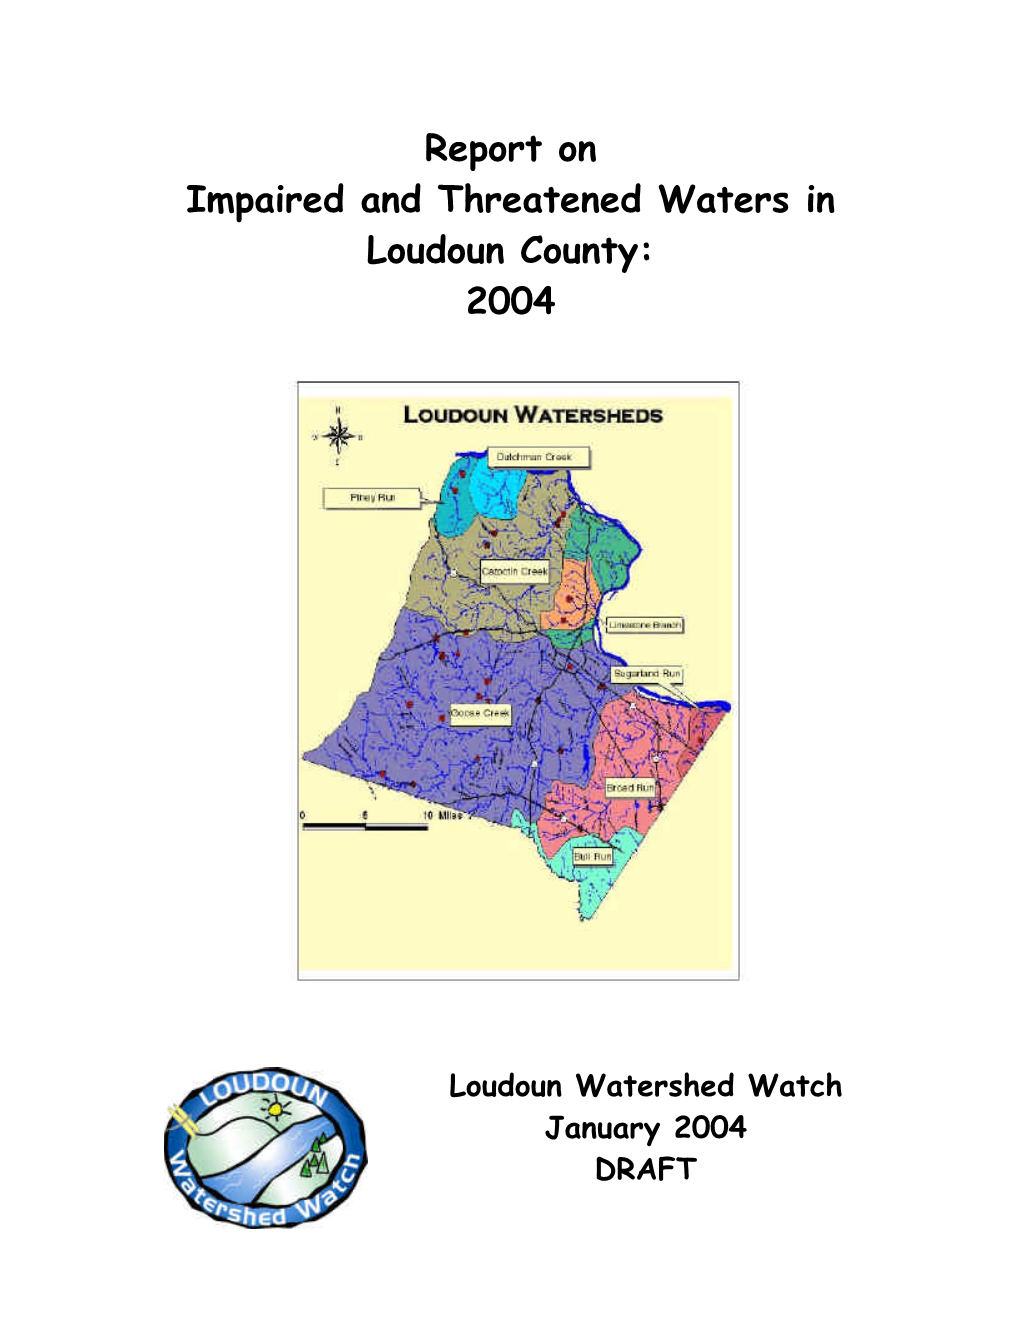 Report on Impaired and Threatened Waters in Loudoun County: 2004